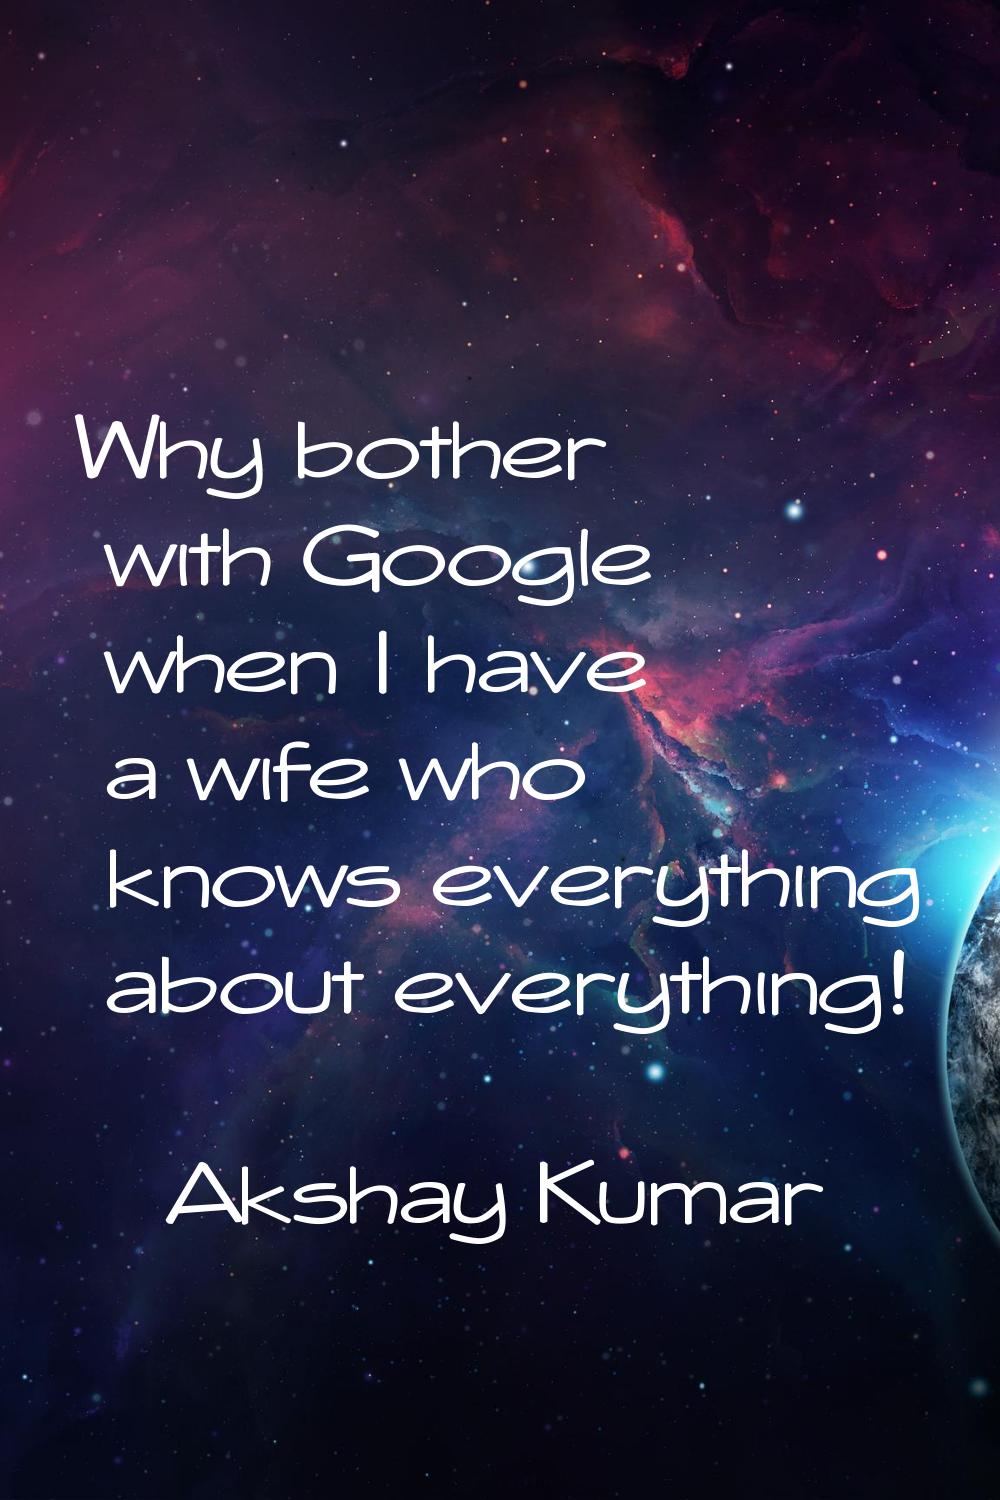 Why bother with Google when I have a wife who knows everything about everything!